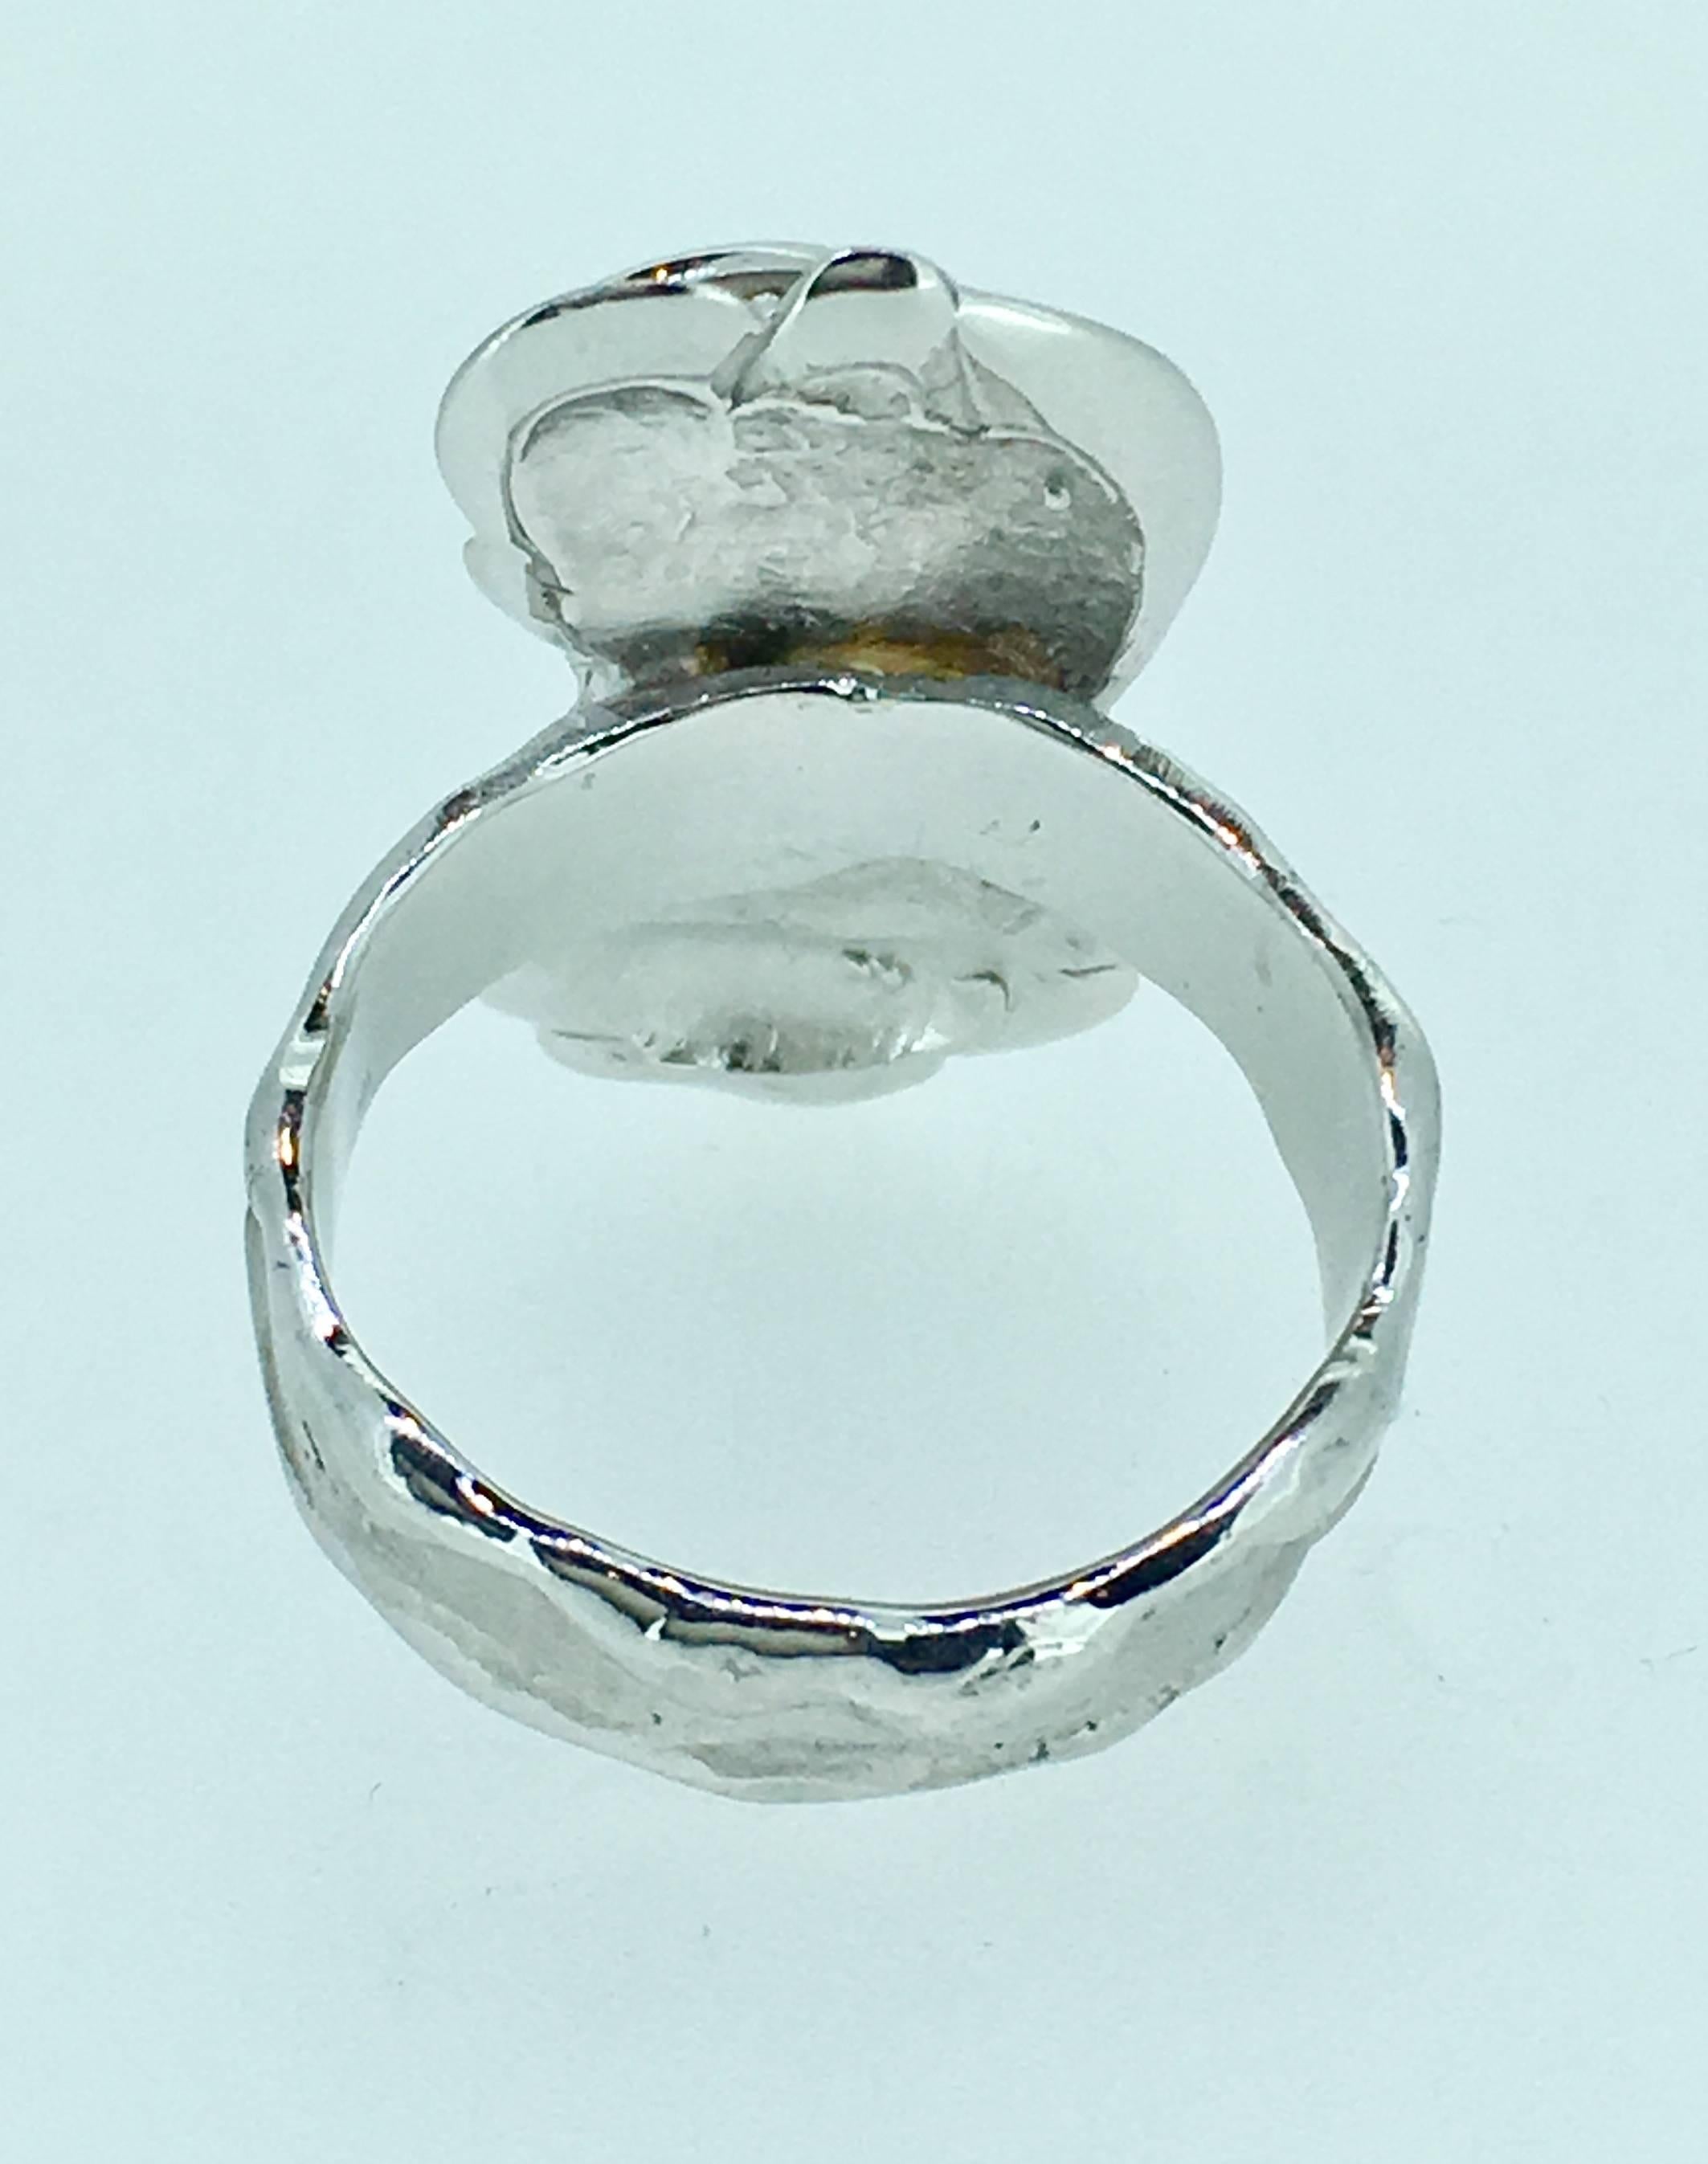 White Gold Ring signed SVG . One of a kind piece that you wear like a sculpture This could be the most original engagement ring you have ever seen.
This piece is 10gr Palladium Gold and 0.10 cts diamonds.
